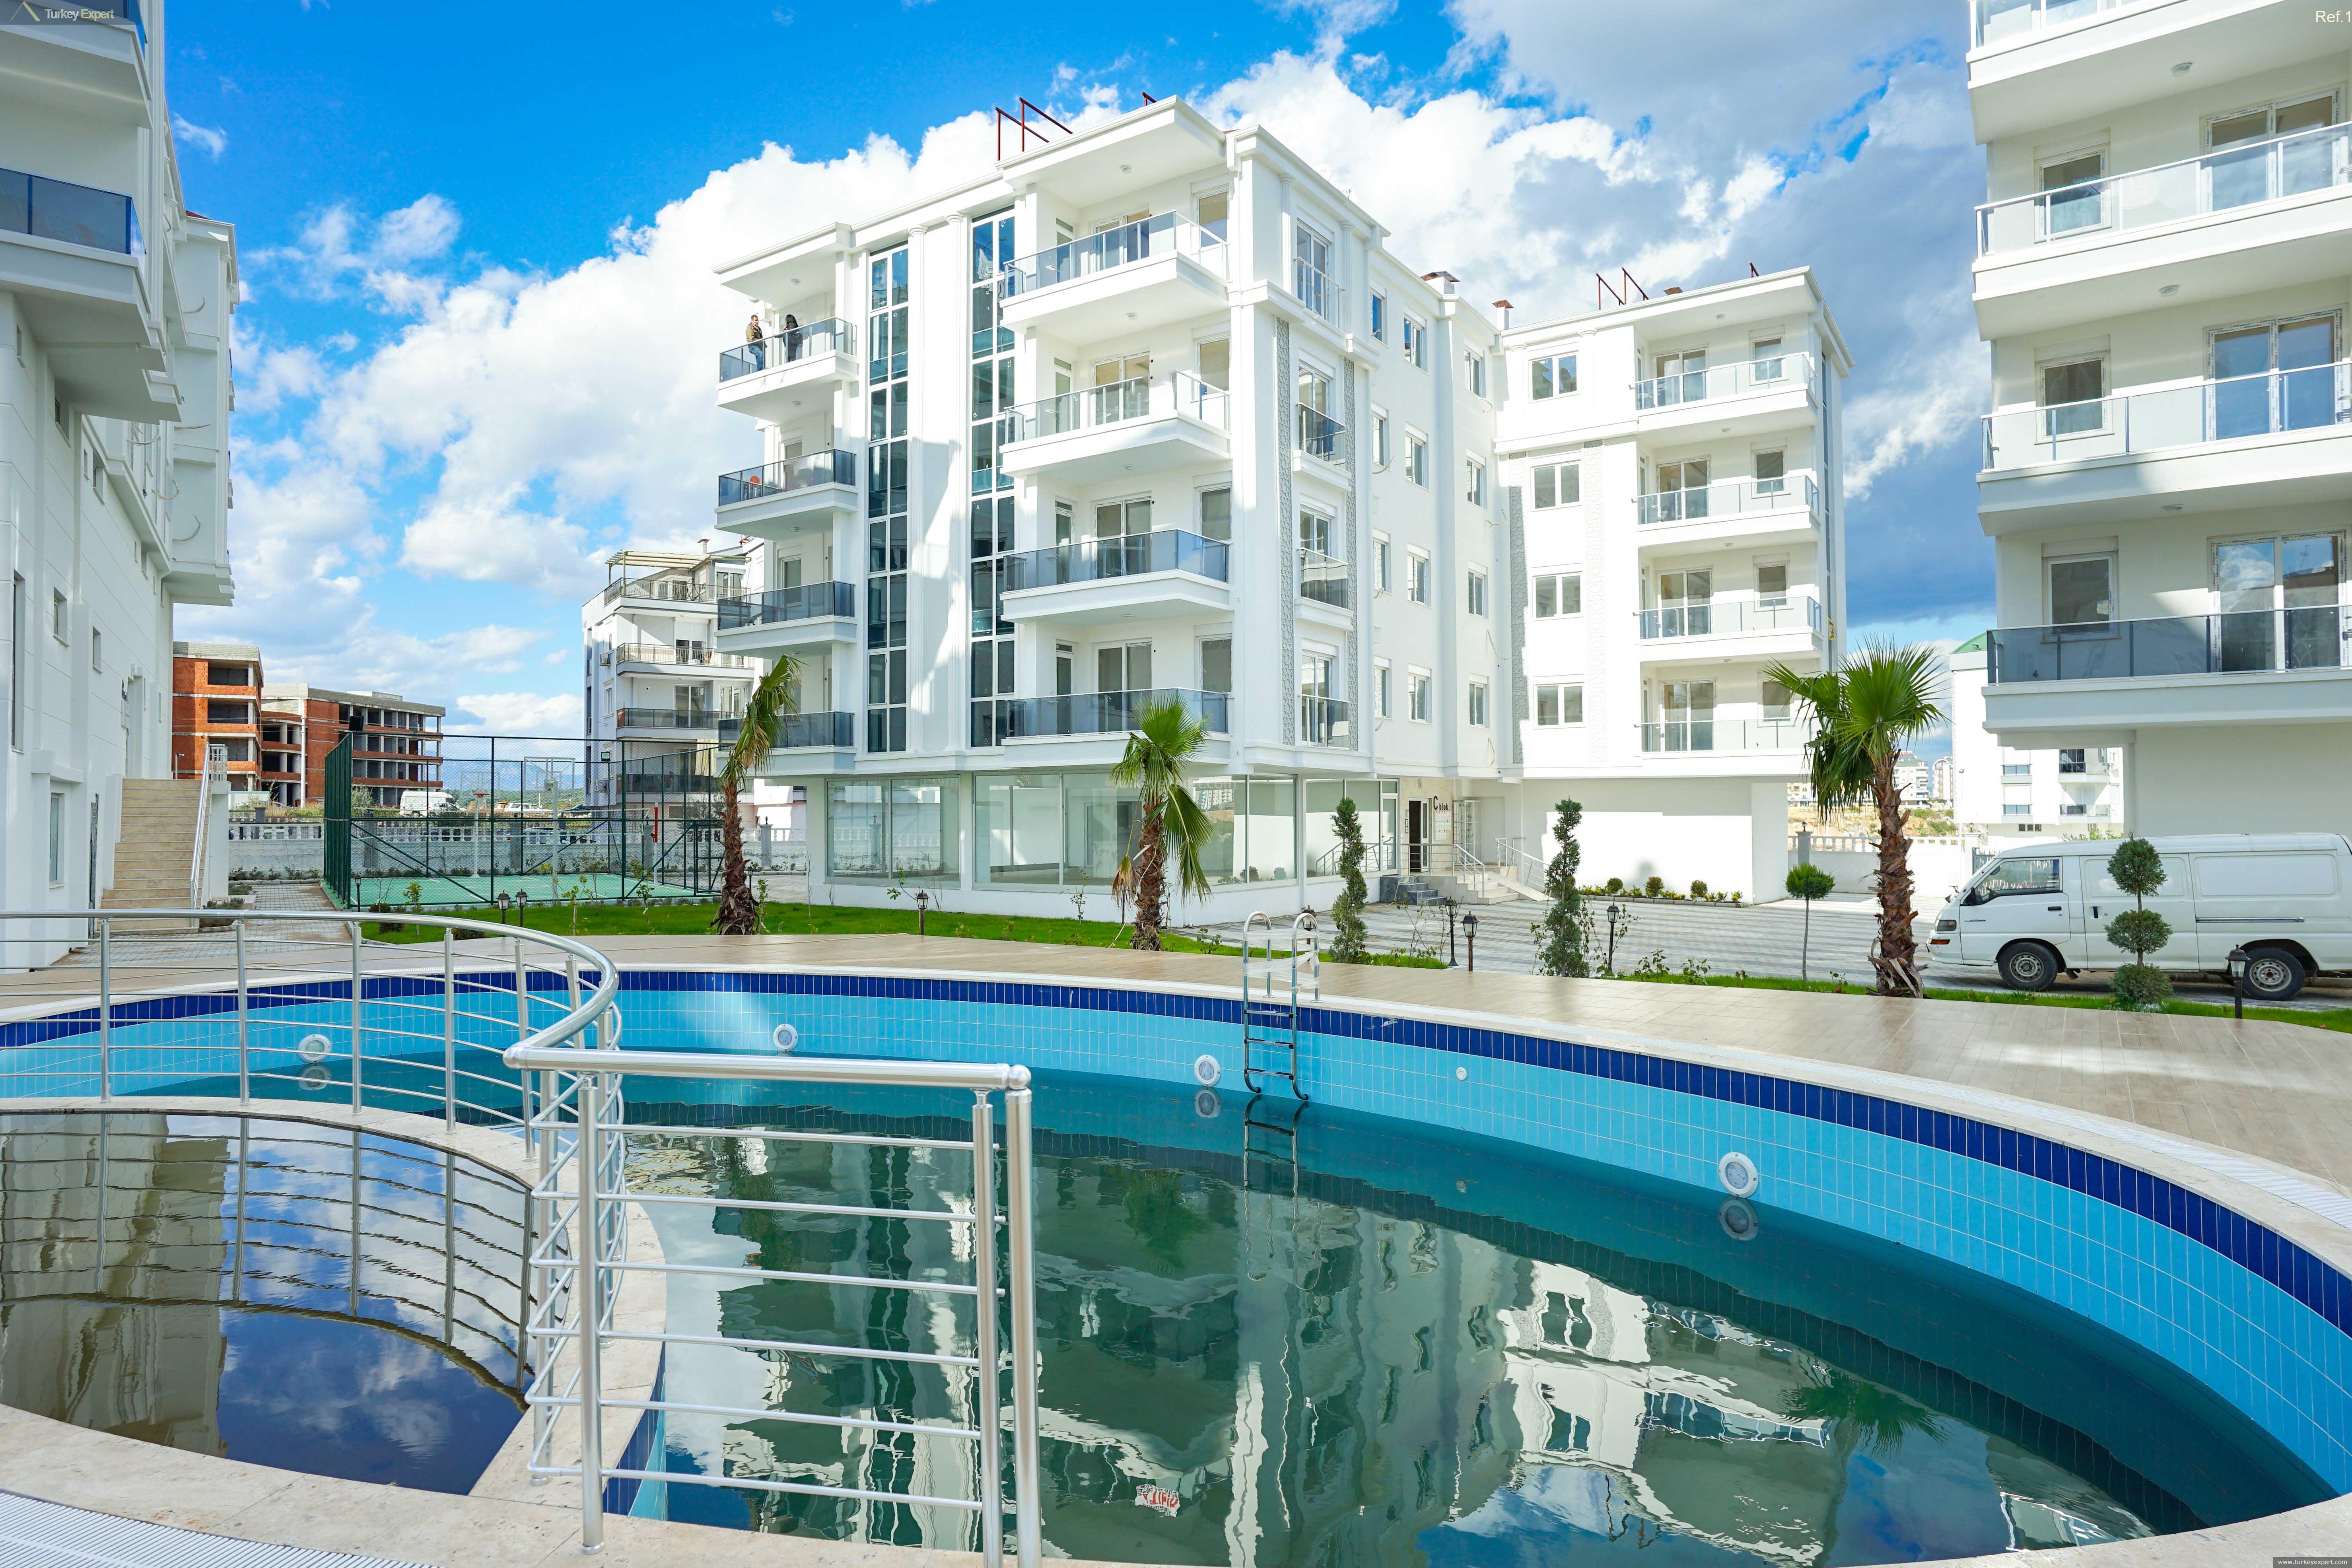 11apartments in a complex with a communal pool in antalya1.